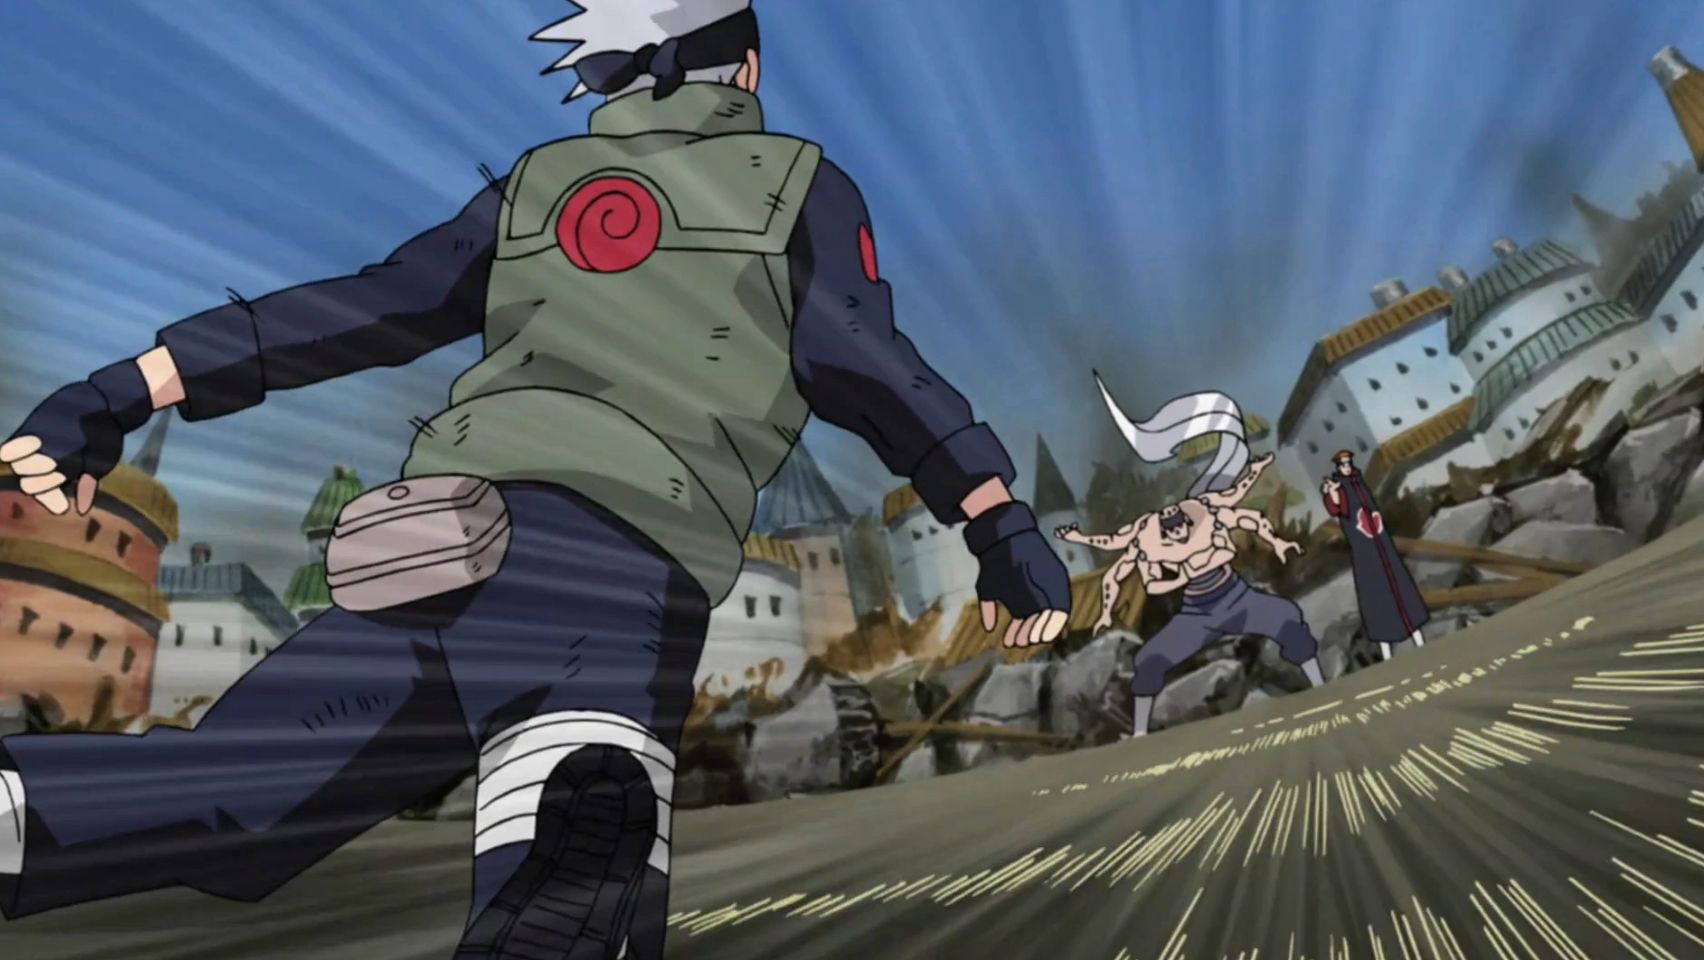 Kakashi Faces Off Against Pain in Naruto Shippuden